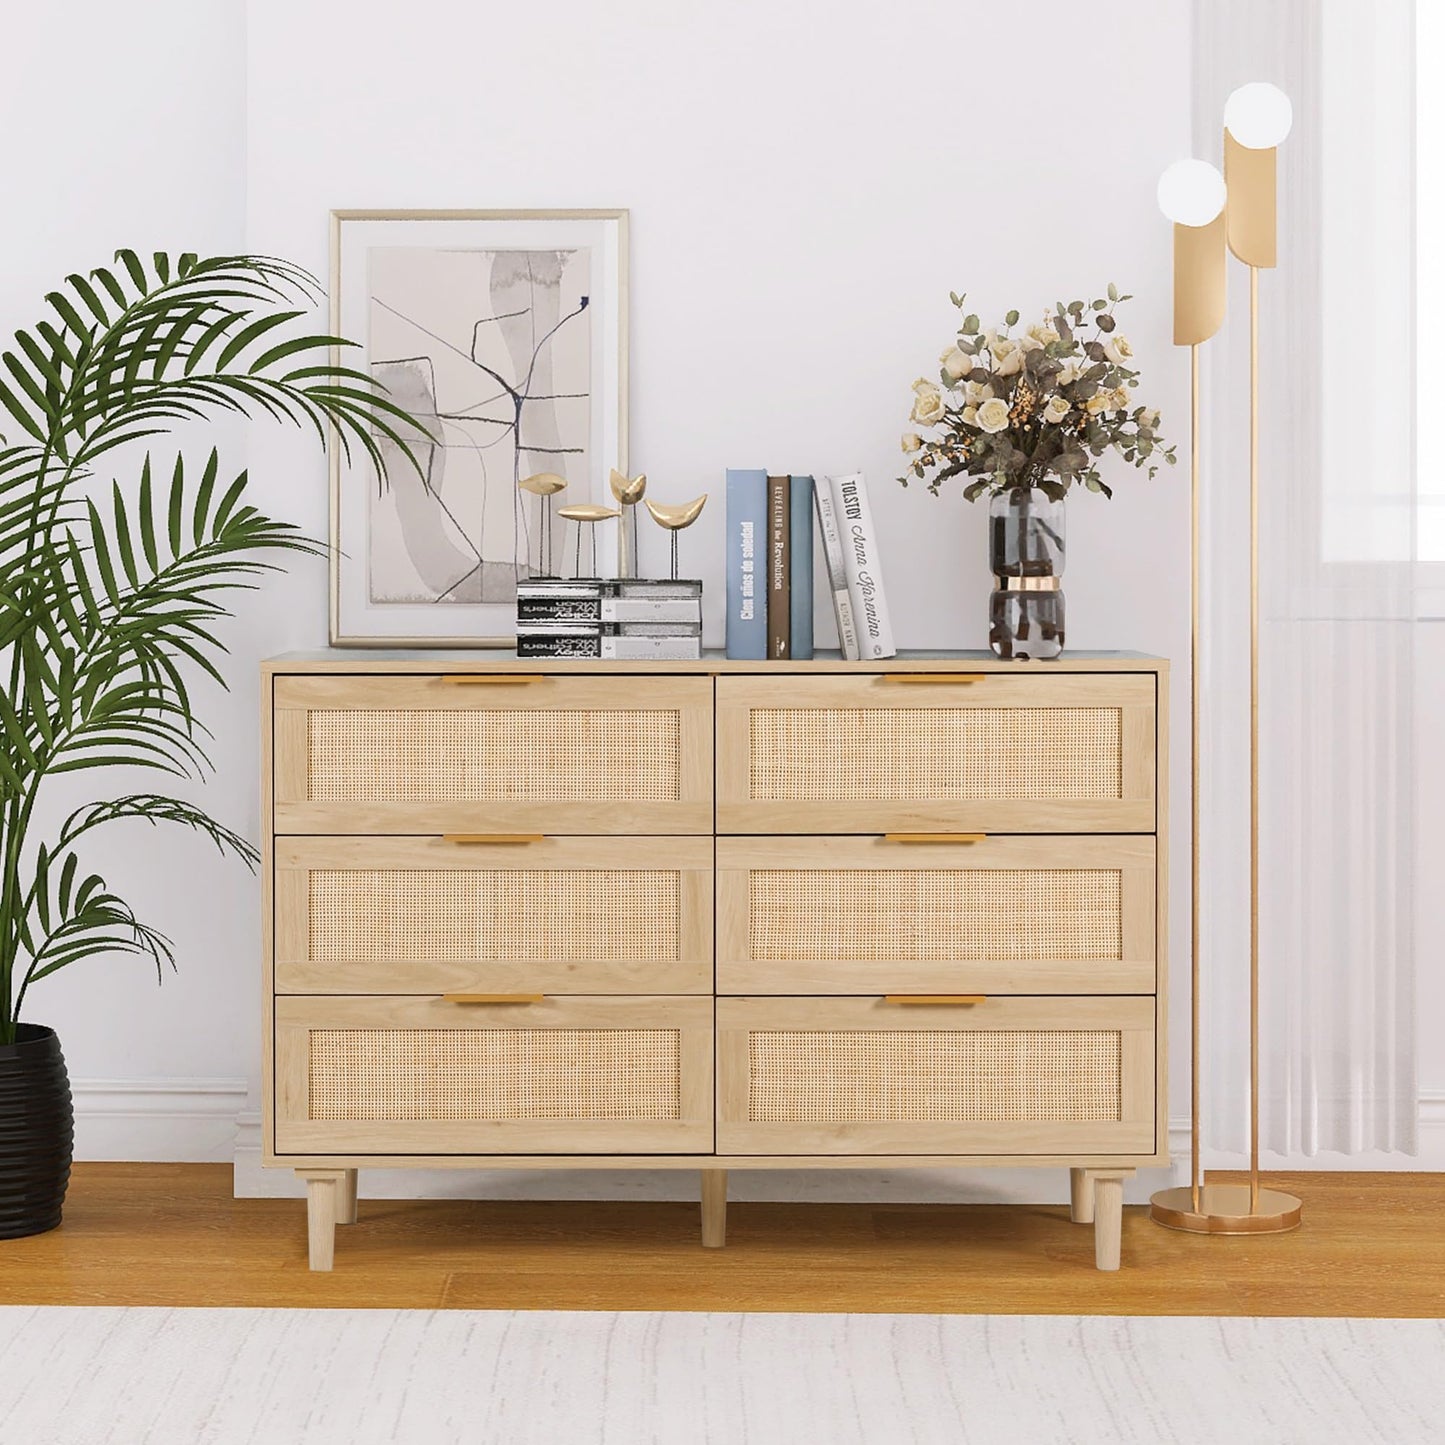 FUQARHY 6 Drawer Dresser Rattan Dresser Modern Chest with Drawers,Wood Storage Closet Dressers Chest of Drawers for Bedroom,Living Room,Hallway